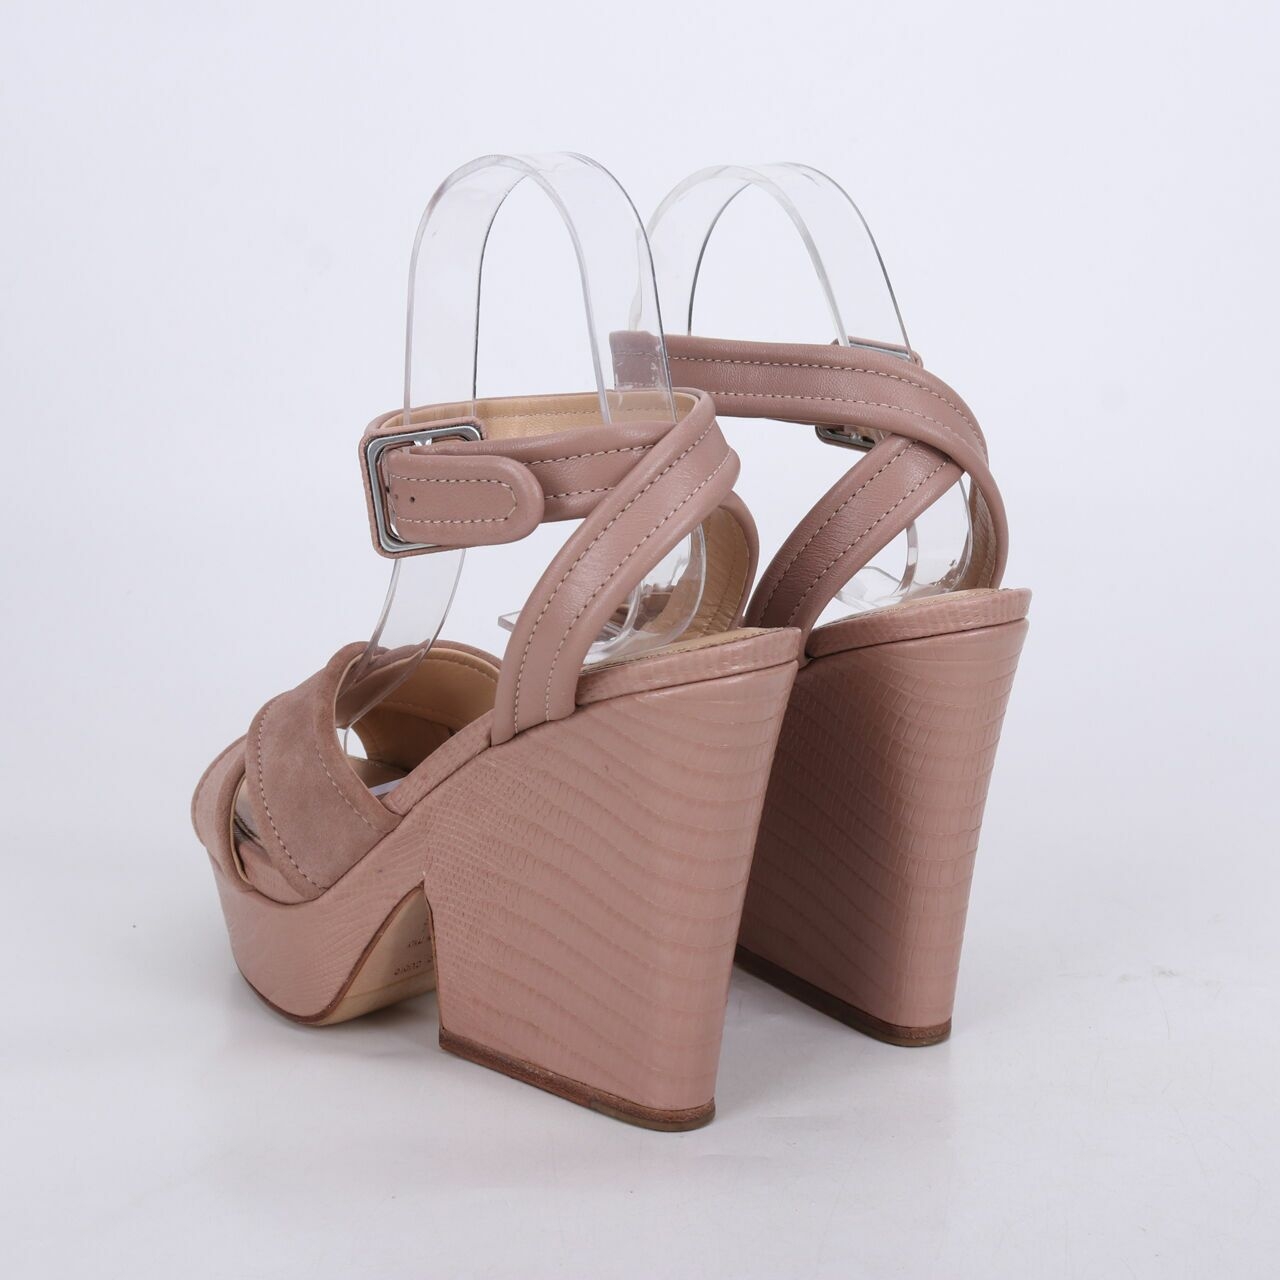 Sergio Rossi Nude Leather Wedges